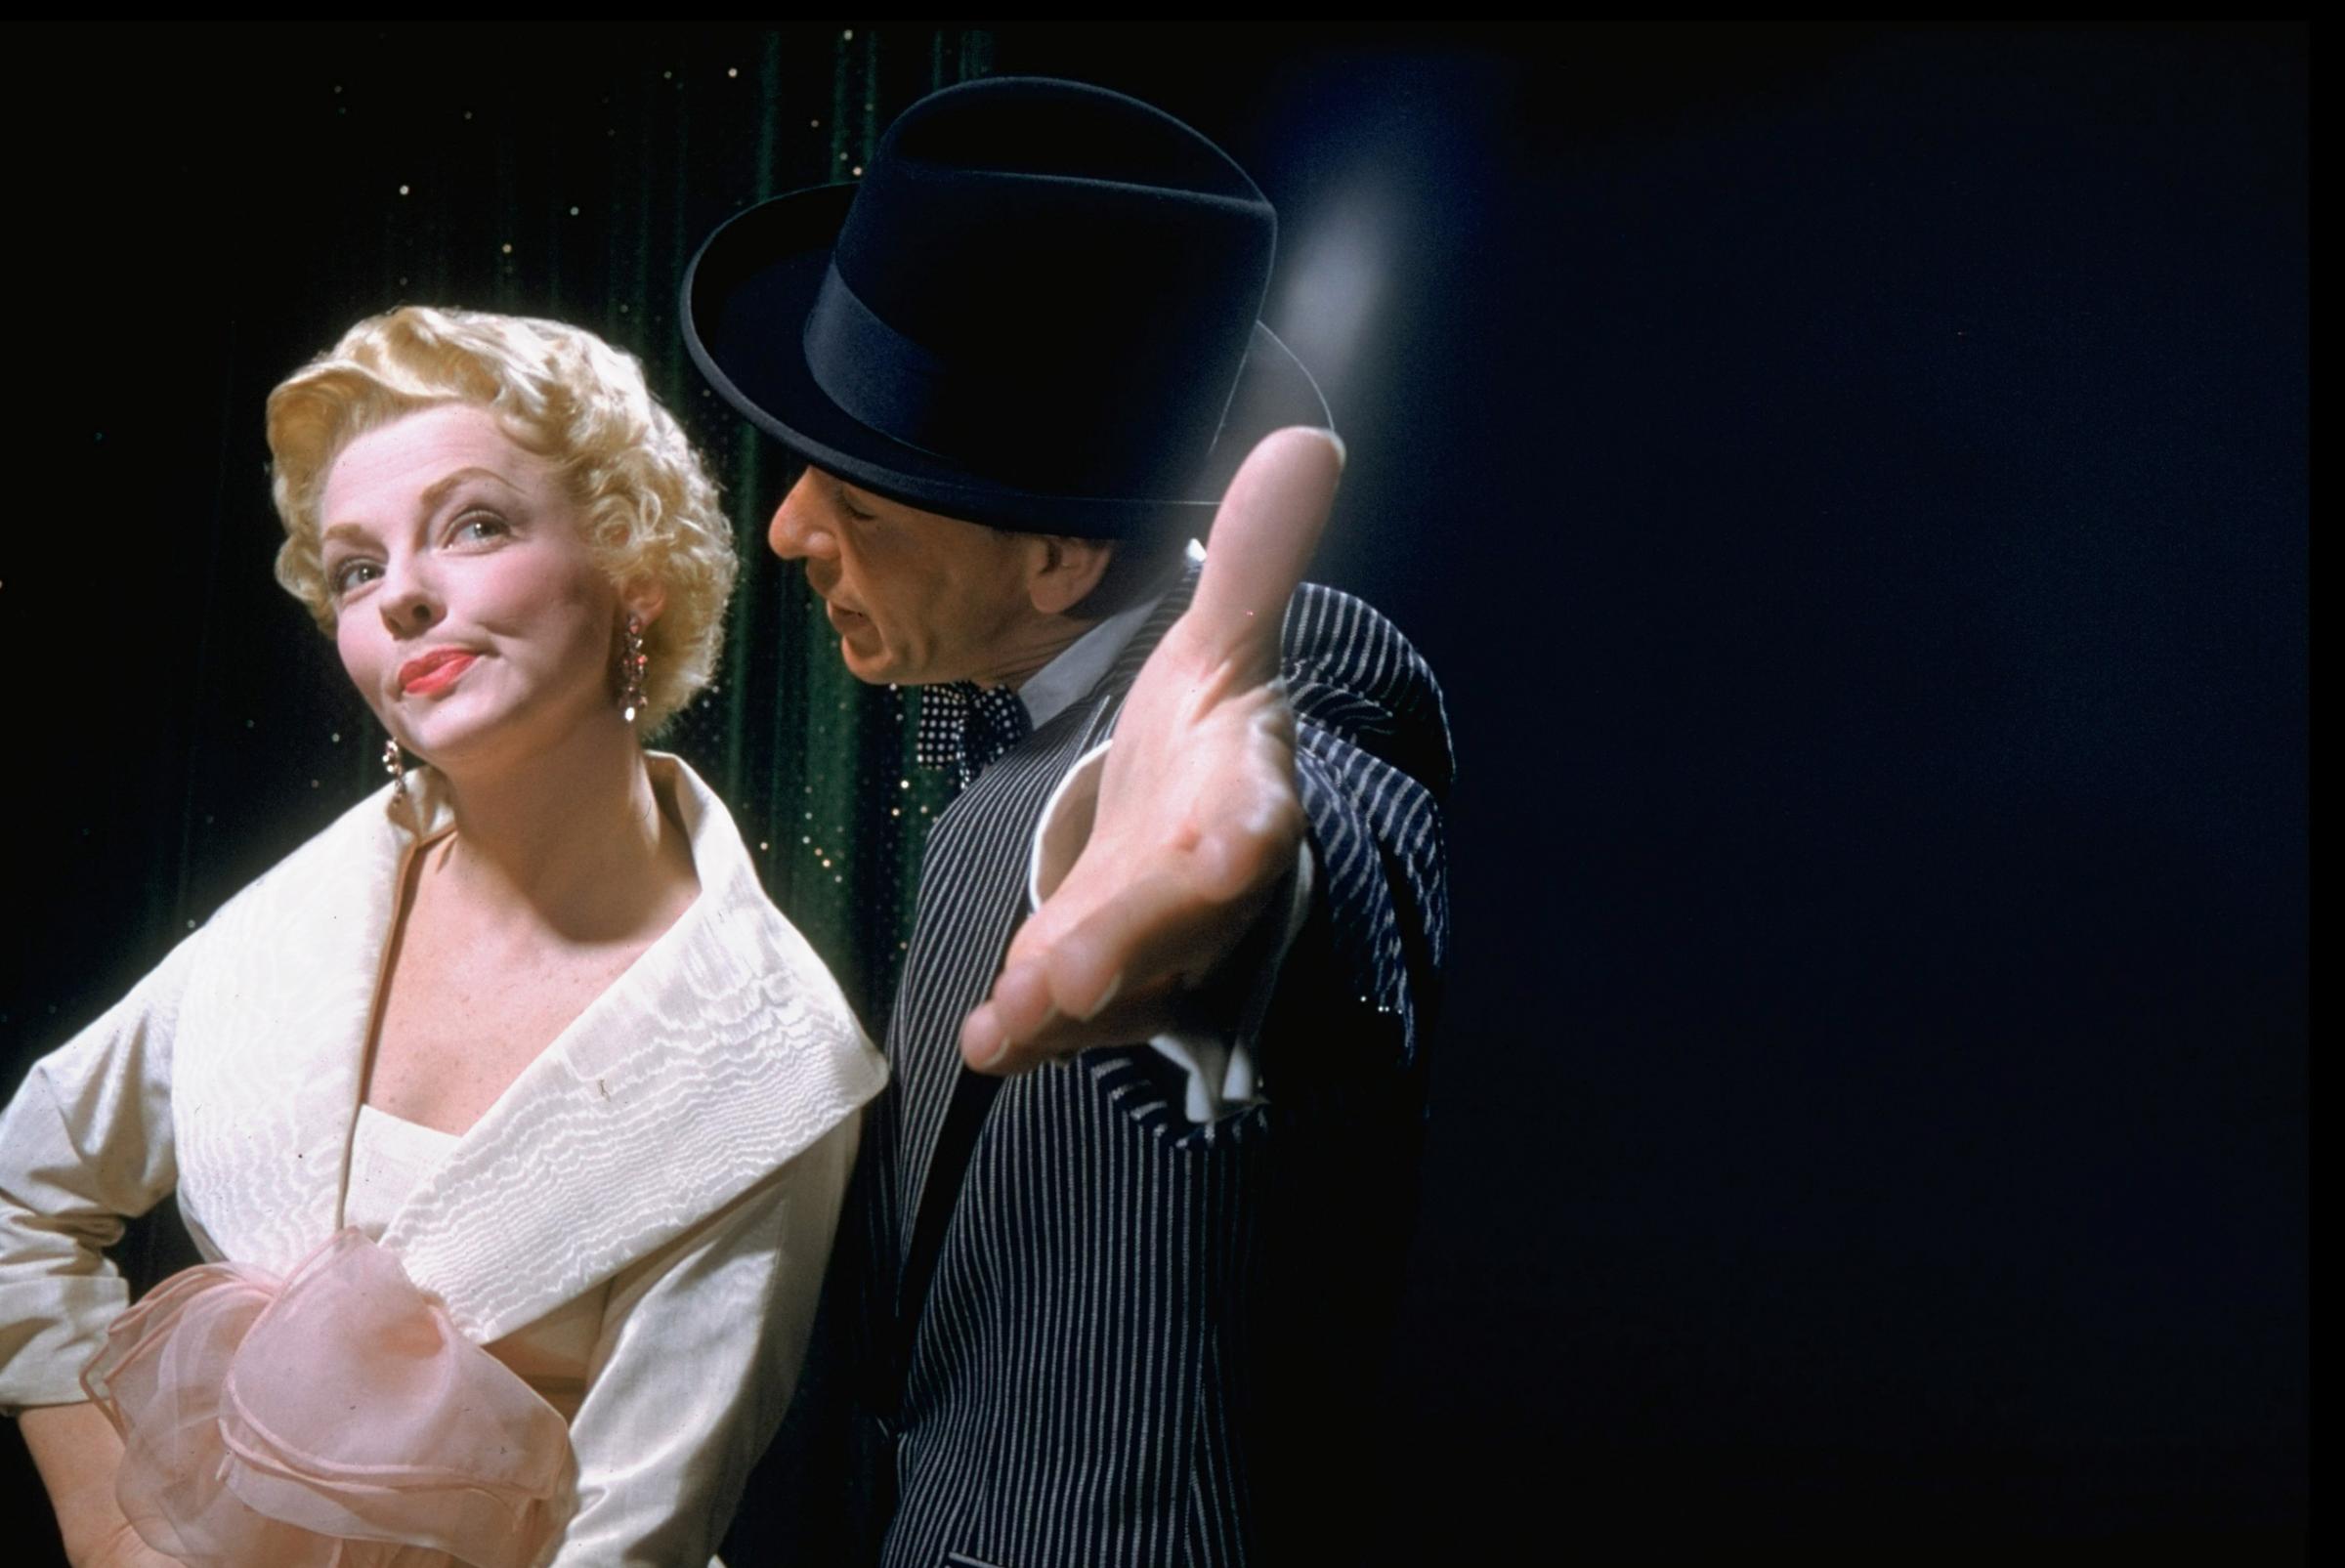 Frank Sinatra singing to Vivian Blaine in scene from film "Guys and Dolls," 1955.